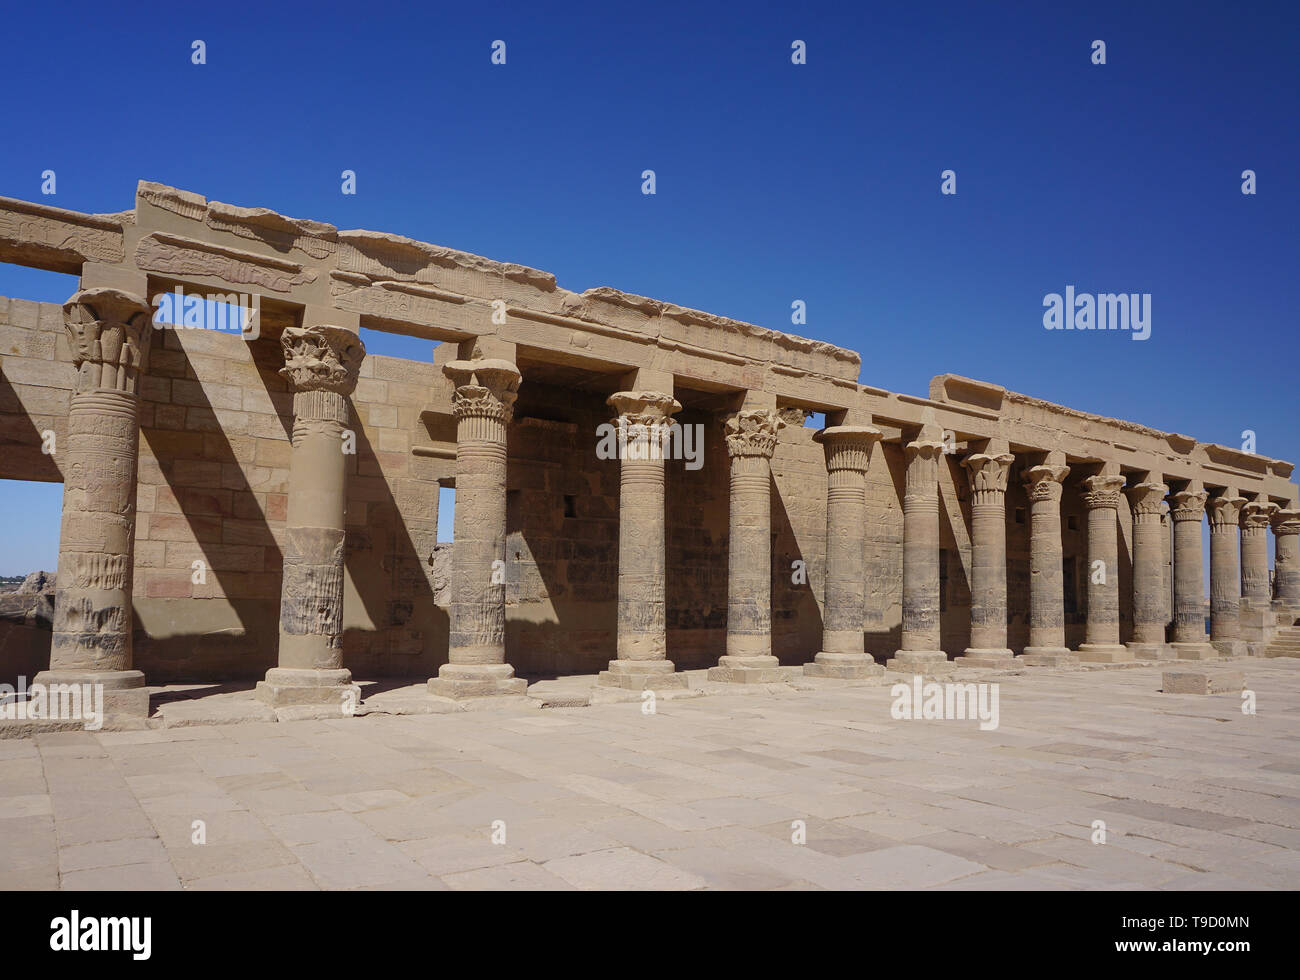 Aswan, Egypt: A row of columns at the relocated temple complex of Philae, built during the Ptolemaic Kingdom. Stock Photo